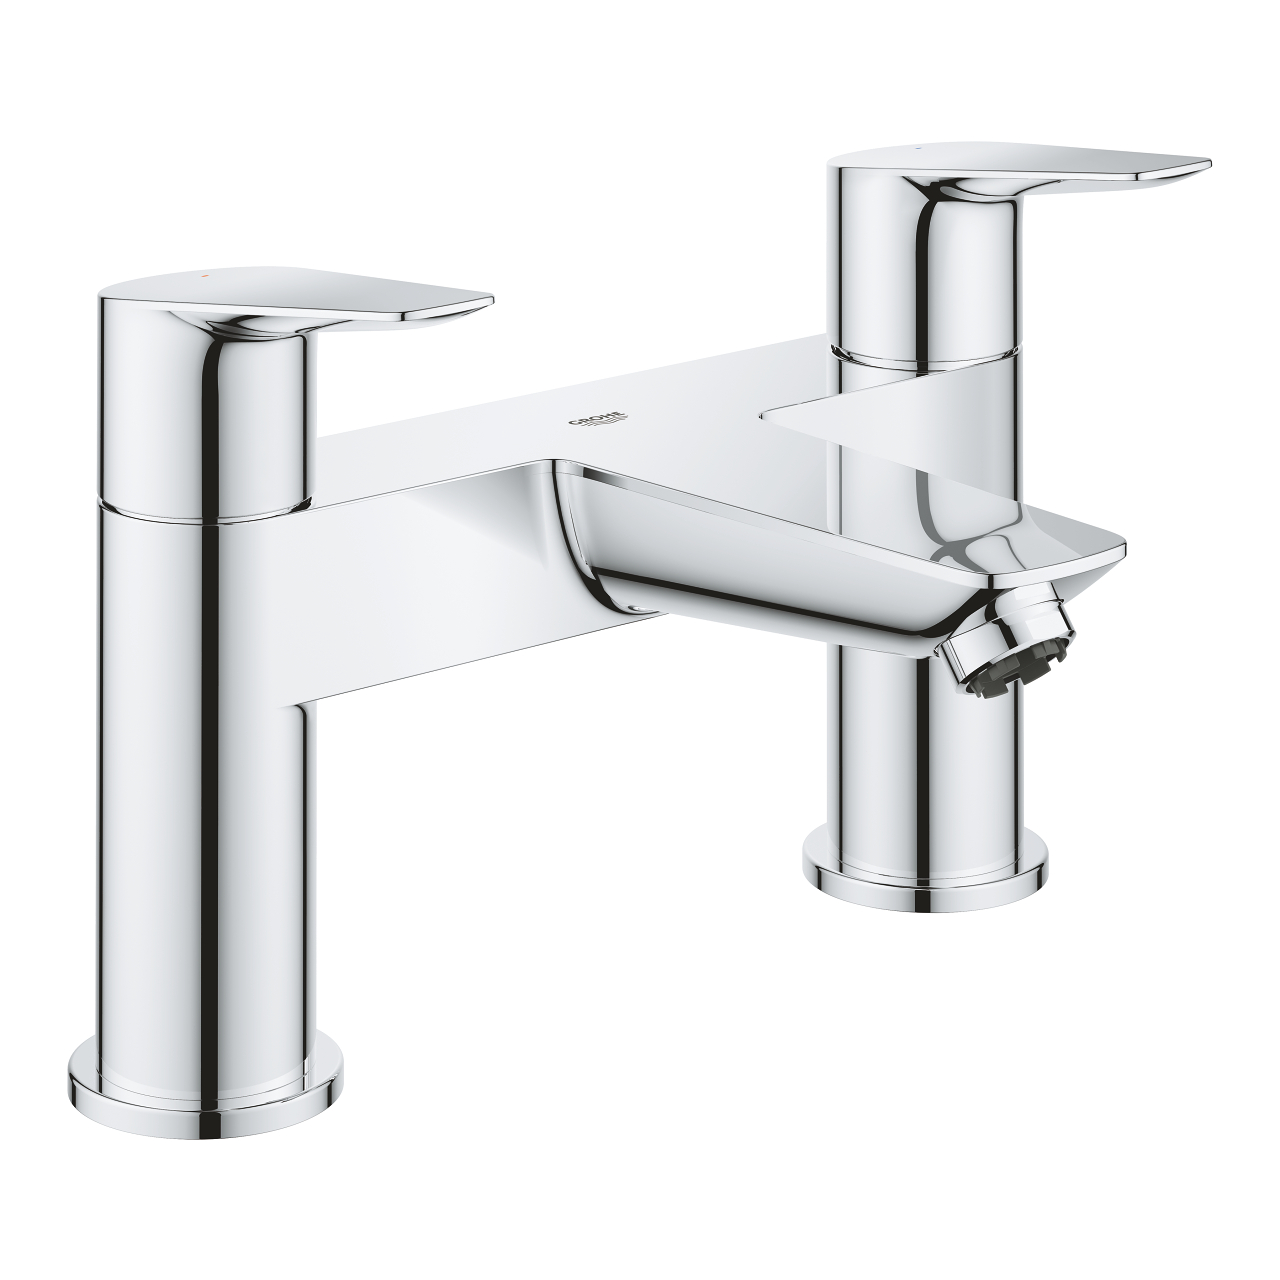 Grohe Bauedge, BAUEDGE TWO-HANDLED BATH FILLER 1/2? CLEARANCE 